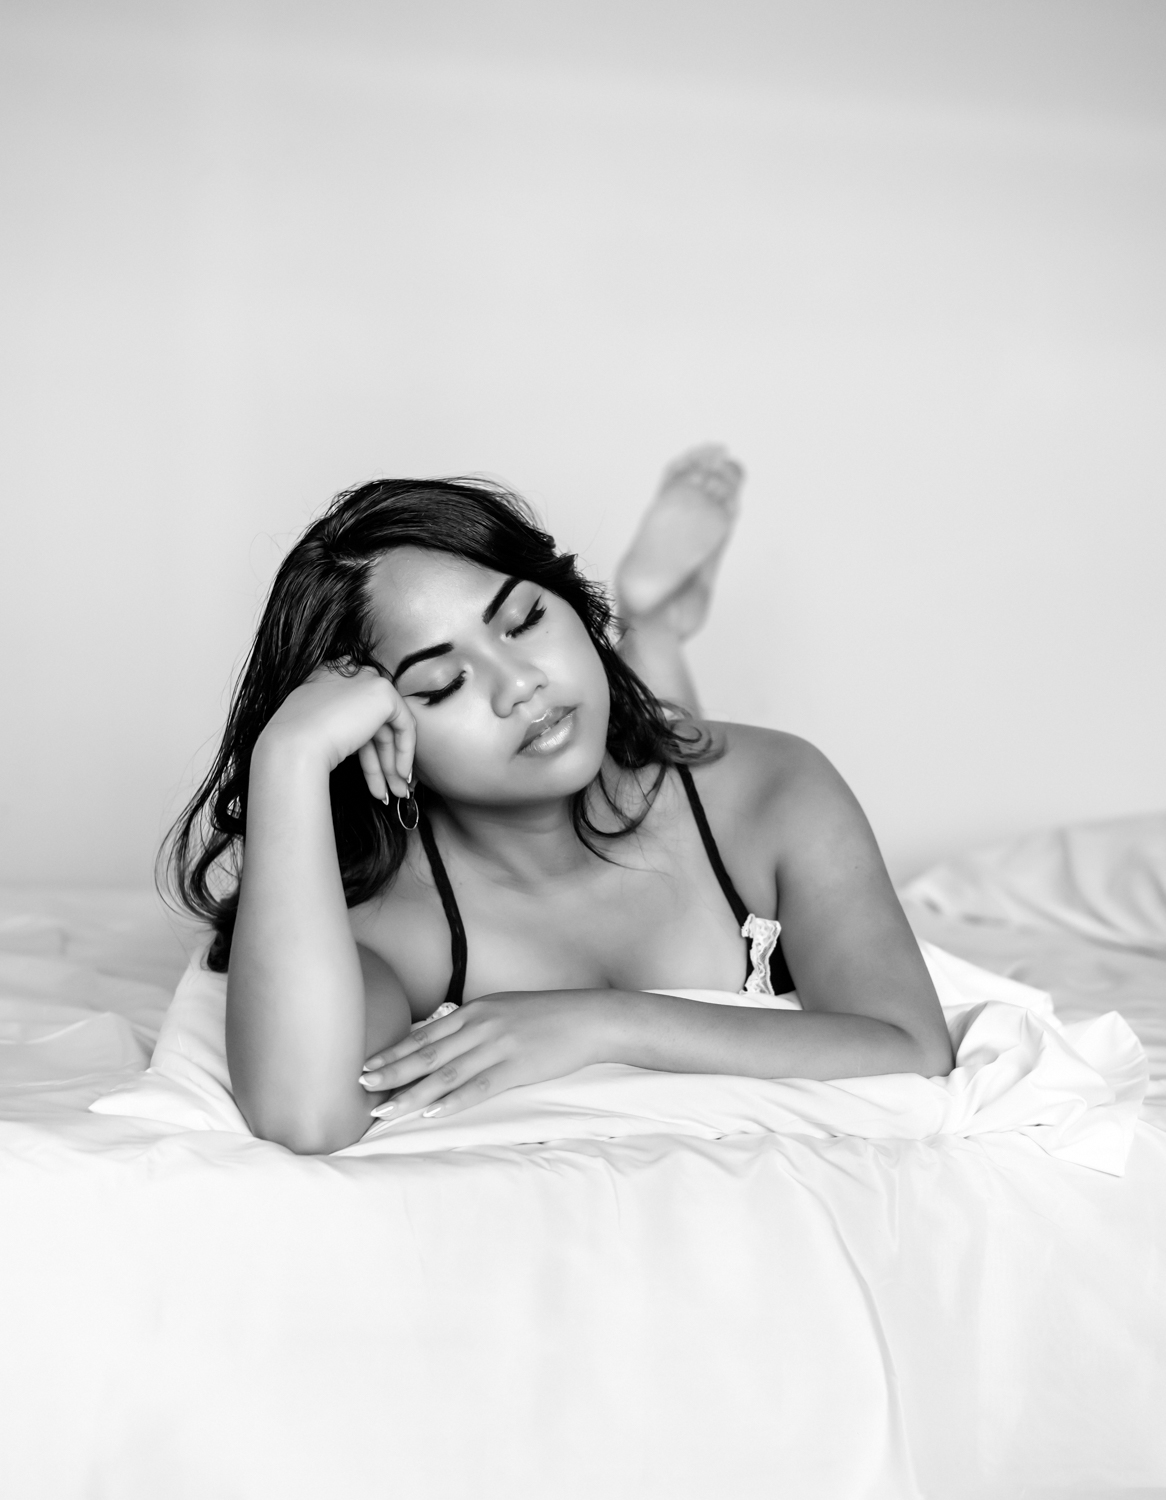 Portrait and boudoir photographer, Rawle C Jackman. Serving the TriState area. Also available to travel.